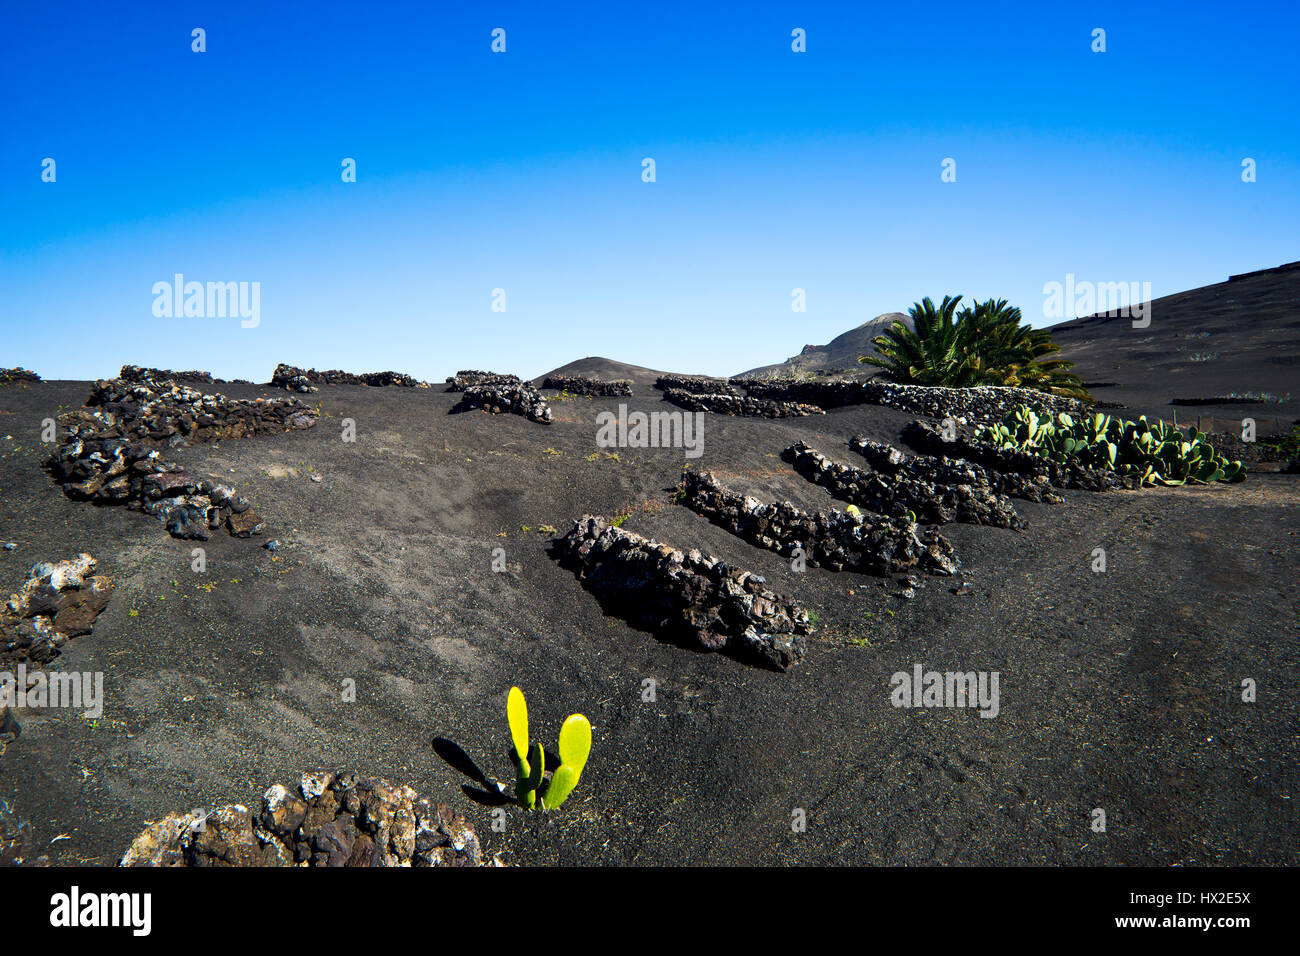 the archaic landscape of Timanfaya Nationalpark on the island of  Lanzarote Stock Photo